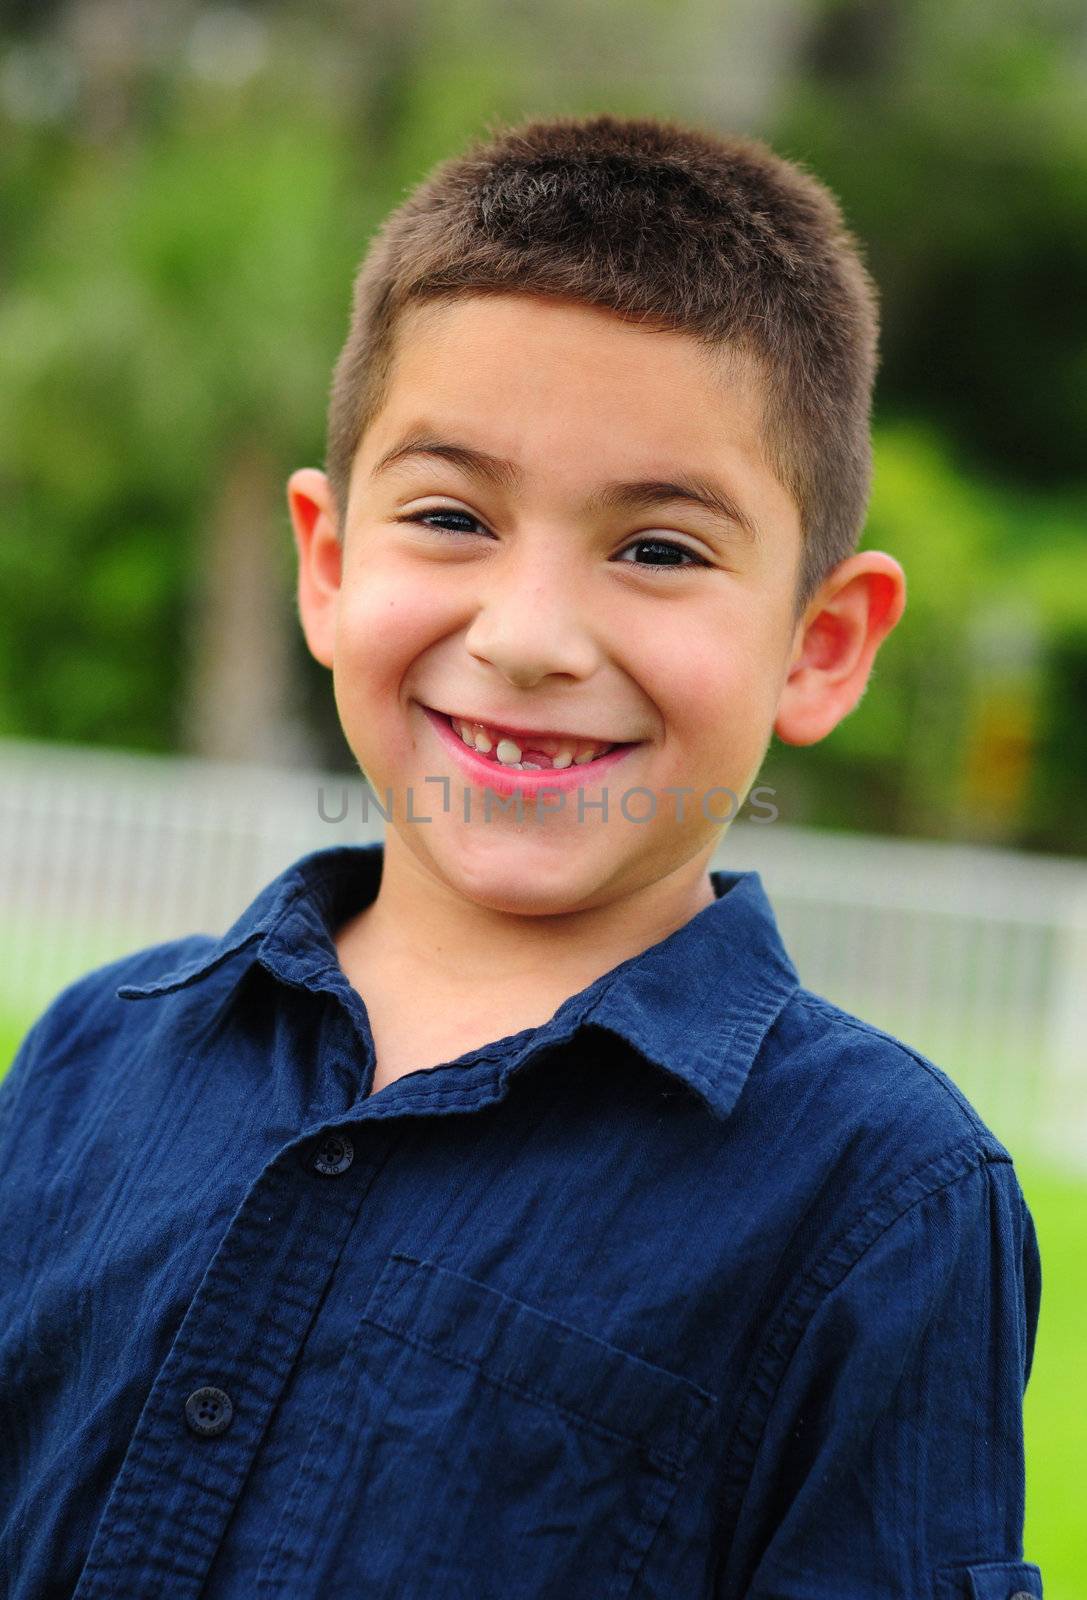 Happy latino child smiling with missing tooth by ftlaudgirl